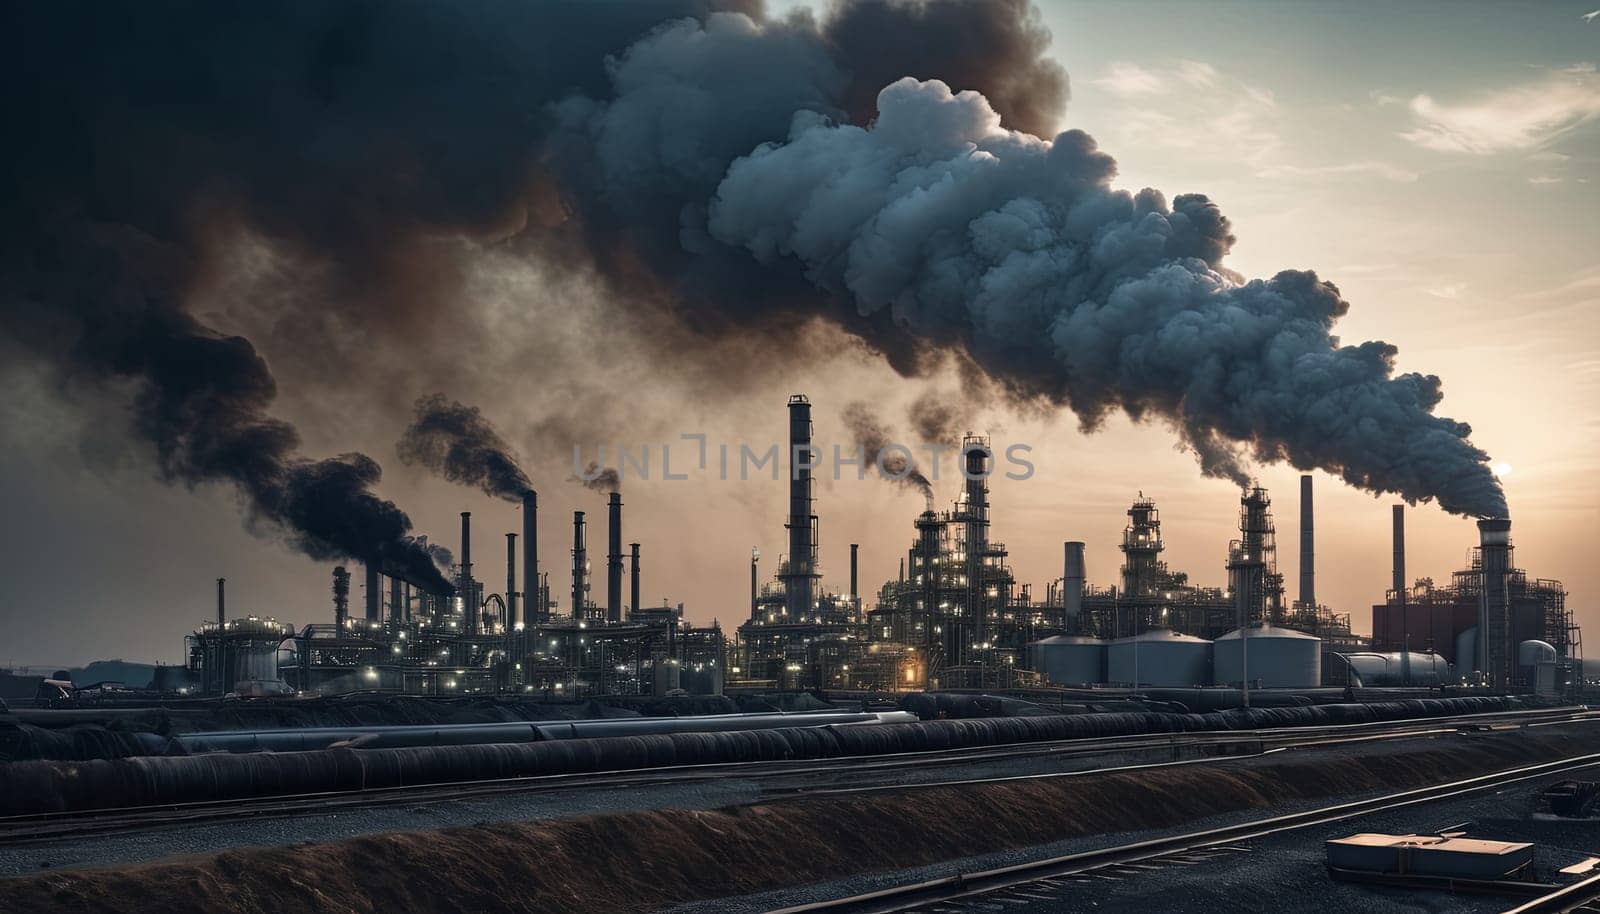 Pollution, Industry, Emissions: Industrial complex emits smoke during evening. pollution impact and environmental concerns. by panophotograph